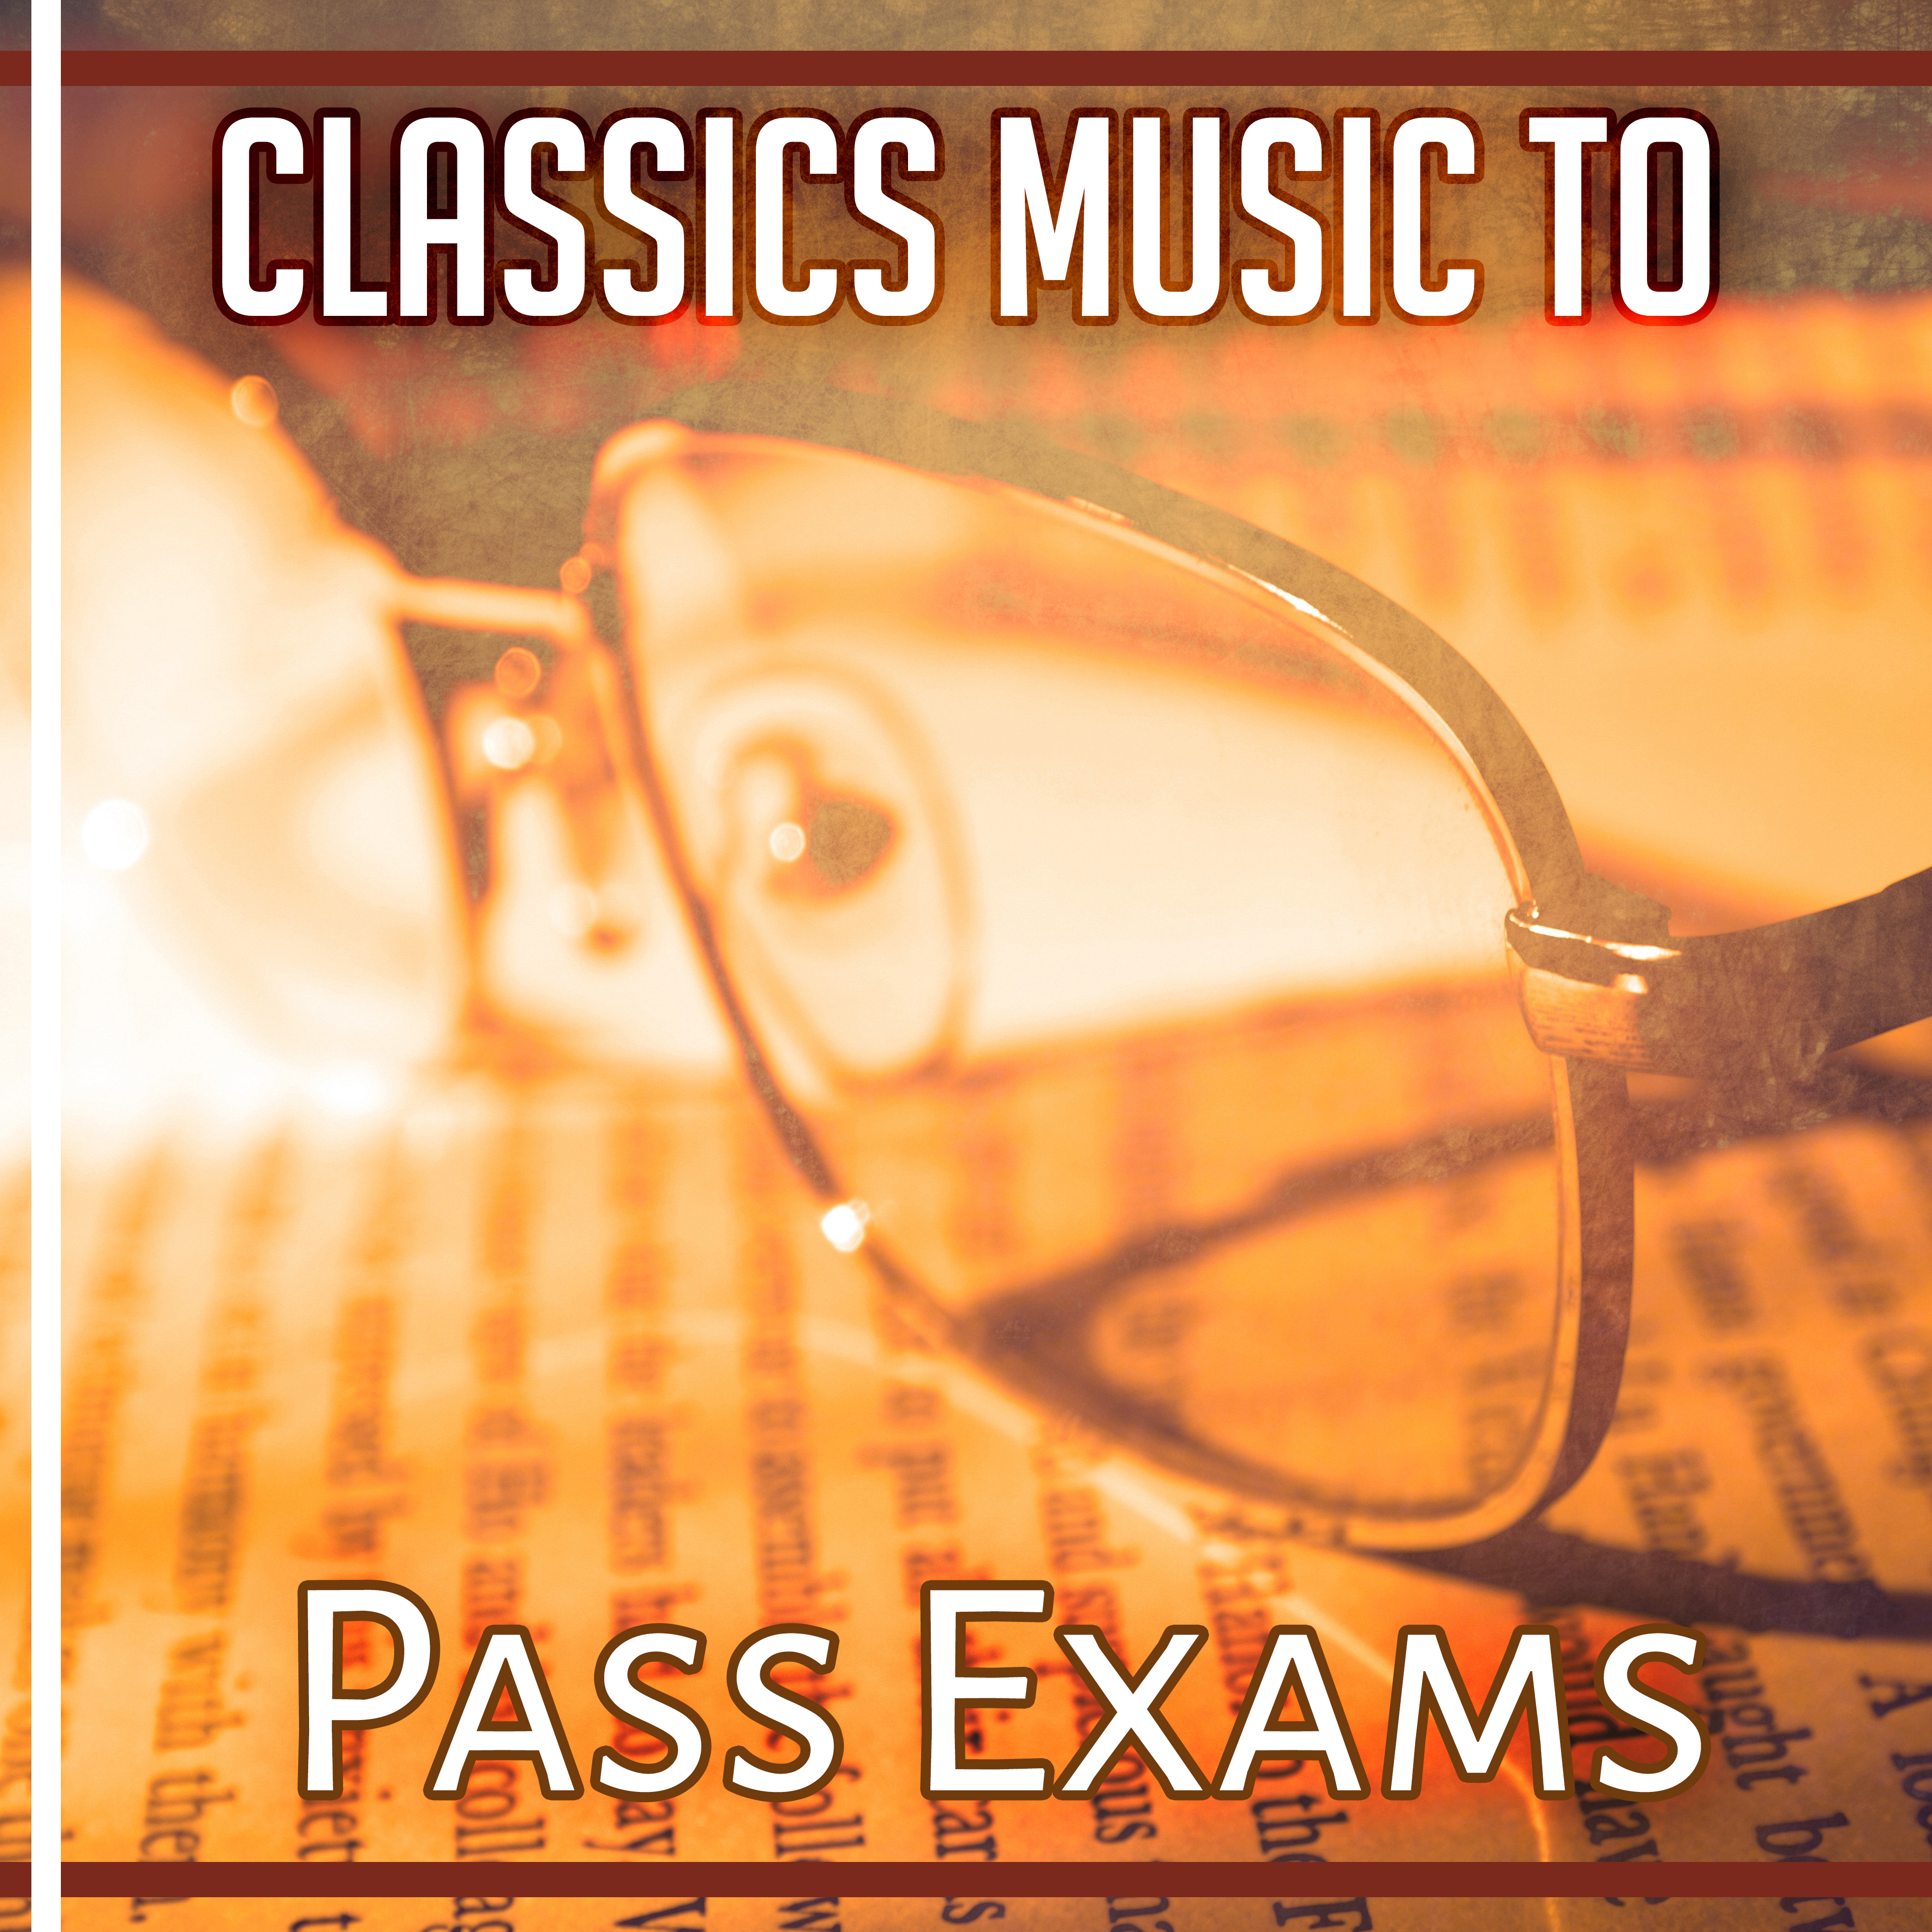 Classics Music to Pass Exams – Stress Relief, Classical Music to Study, Concentrate on Task